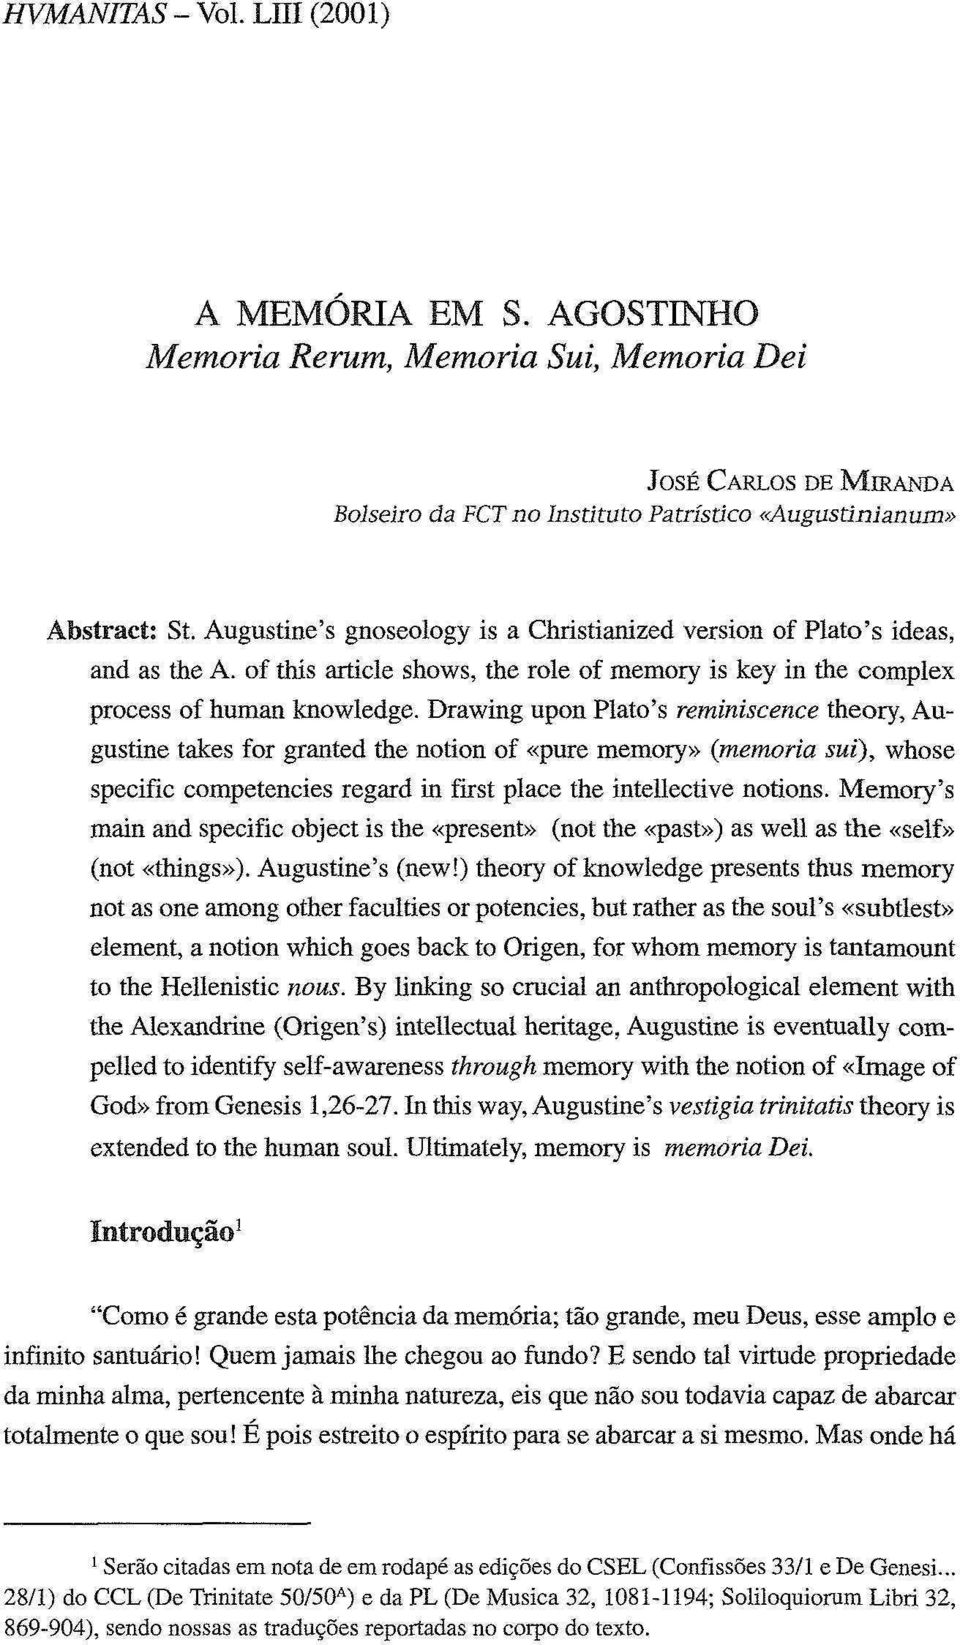 Drawing upon Plato's reminiscence theory, Augustine takes for granted the notion of «puré memory» {memoria sui), whose specific competencies regard in first place the intellective notions.